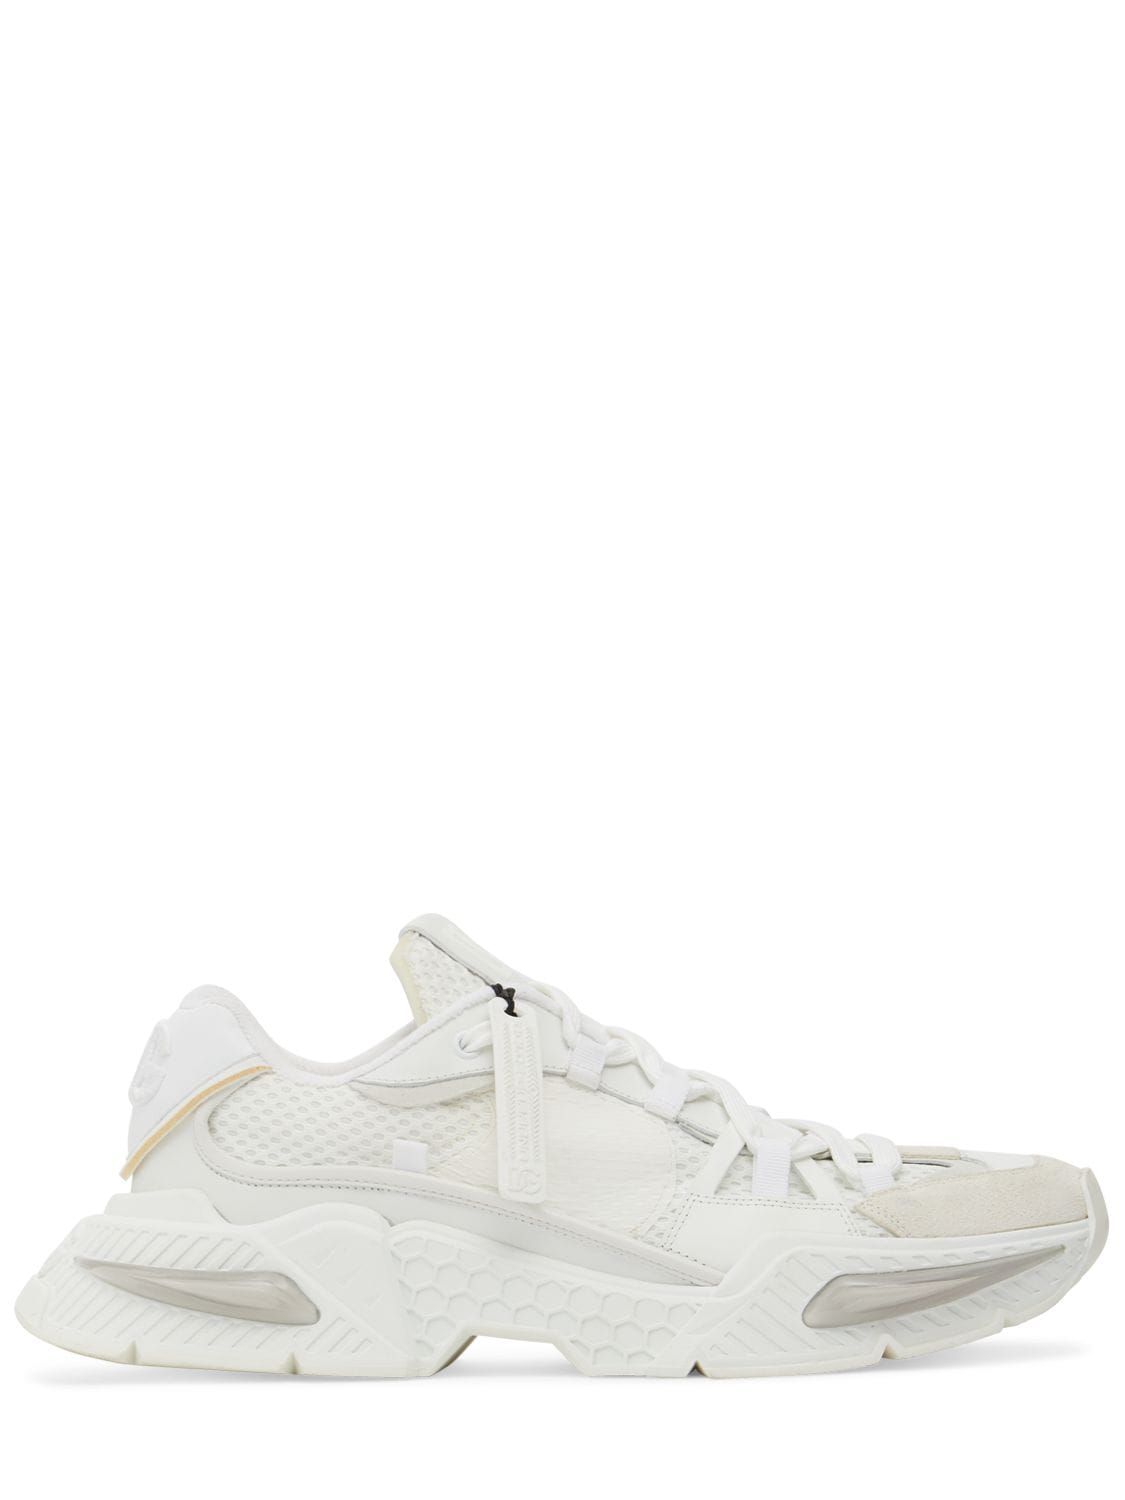 Dolce & Gabbana Airmaster Leather & Tech Trainers In White